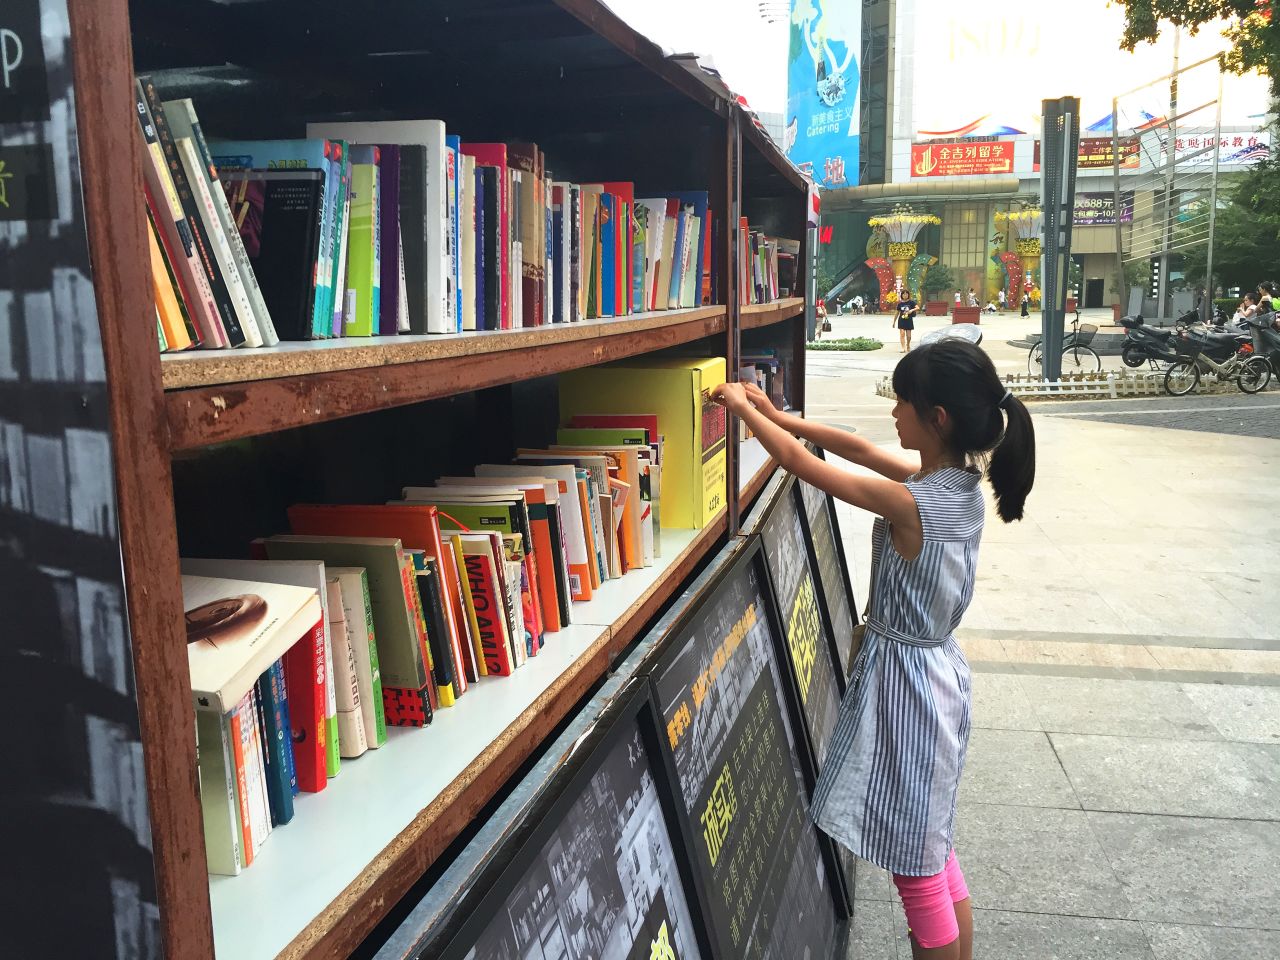 "If they can really finish the books, it doesn't matter if they took the books for free," says Zhu Yu, the marketing director of the company. "In fact, we are really happy to witness so many people taking books from the honesty bookshop."